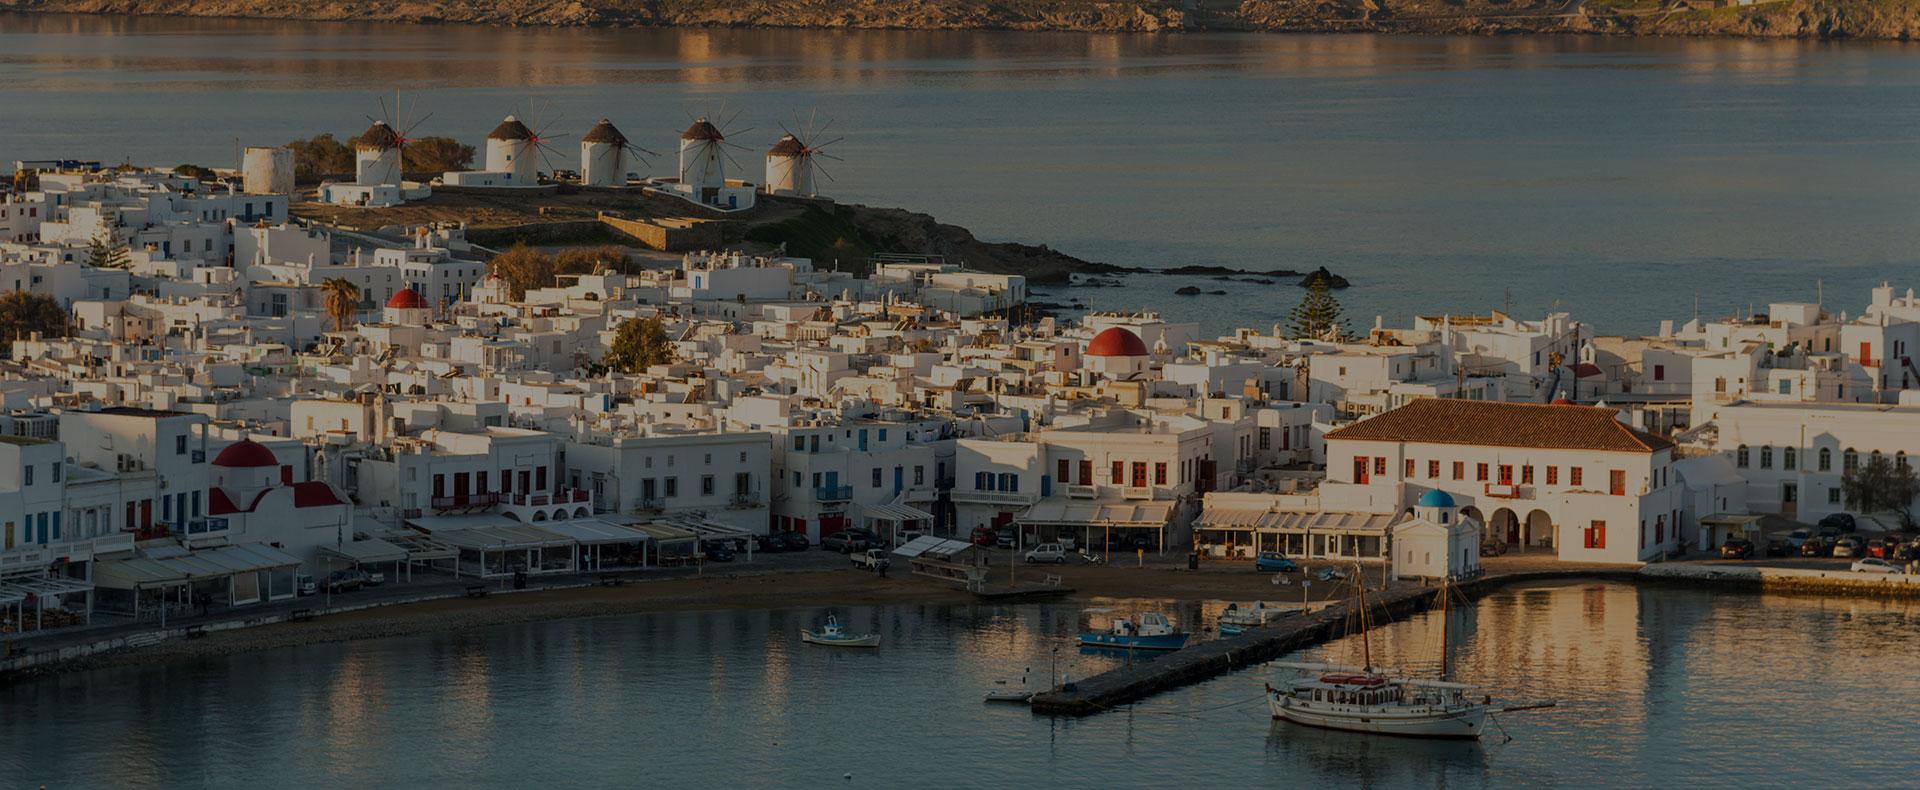 Where to stay in Mykonos